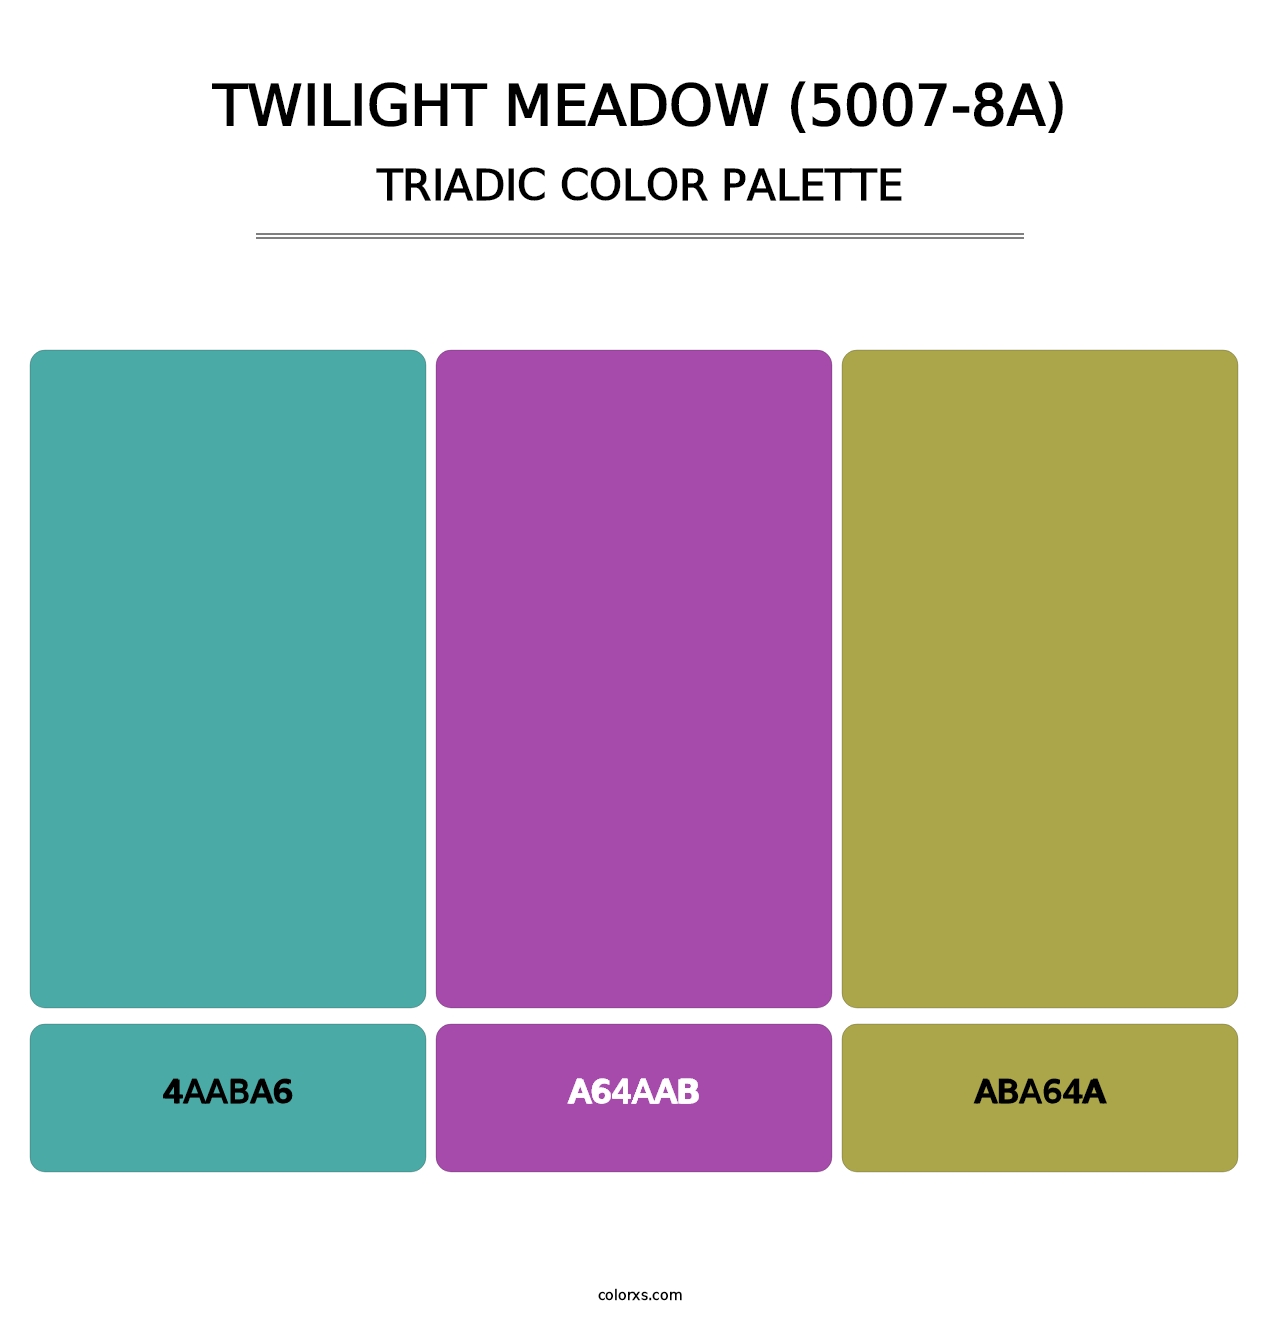 Twilight Meadow (5007-8A) - Triadic Color Palette